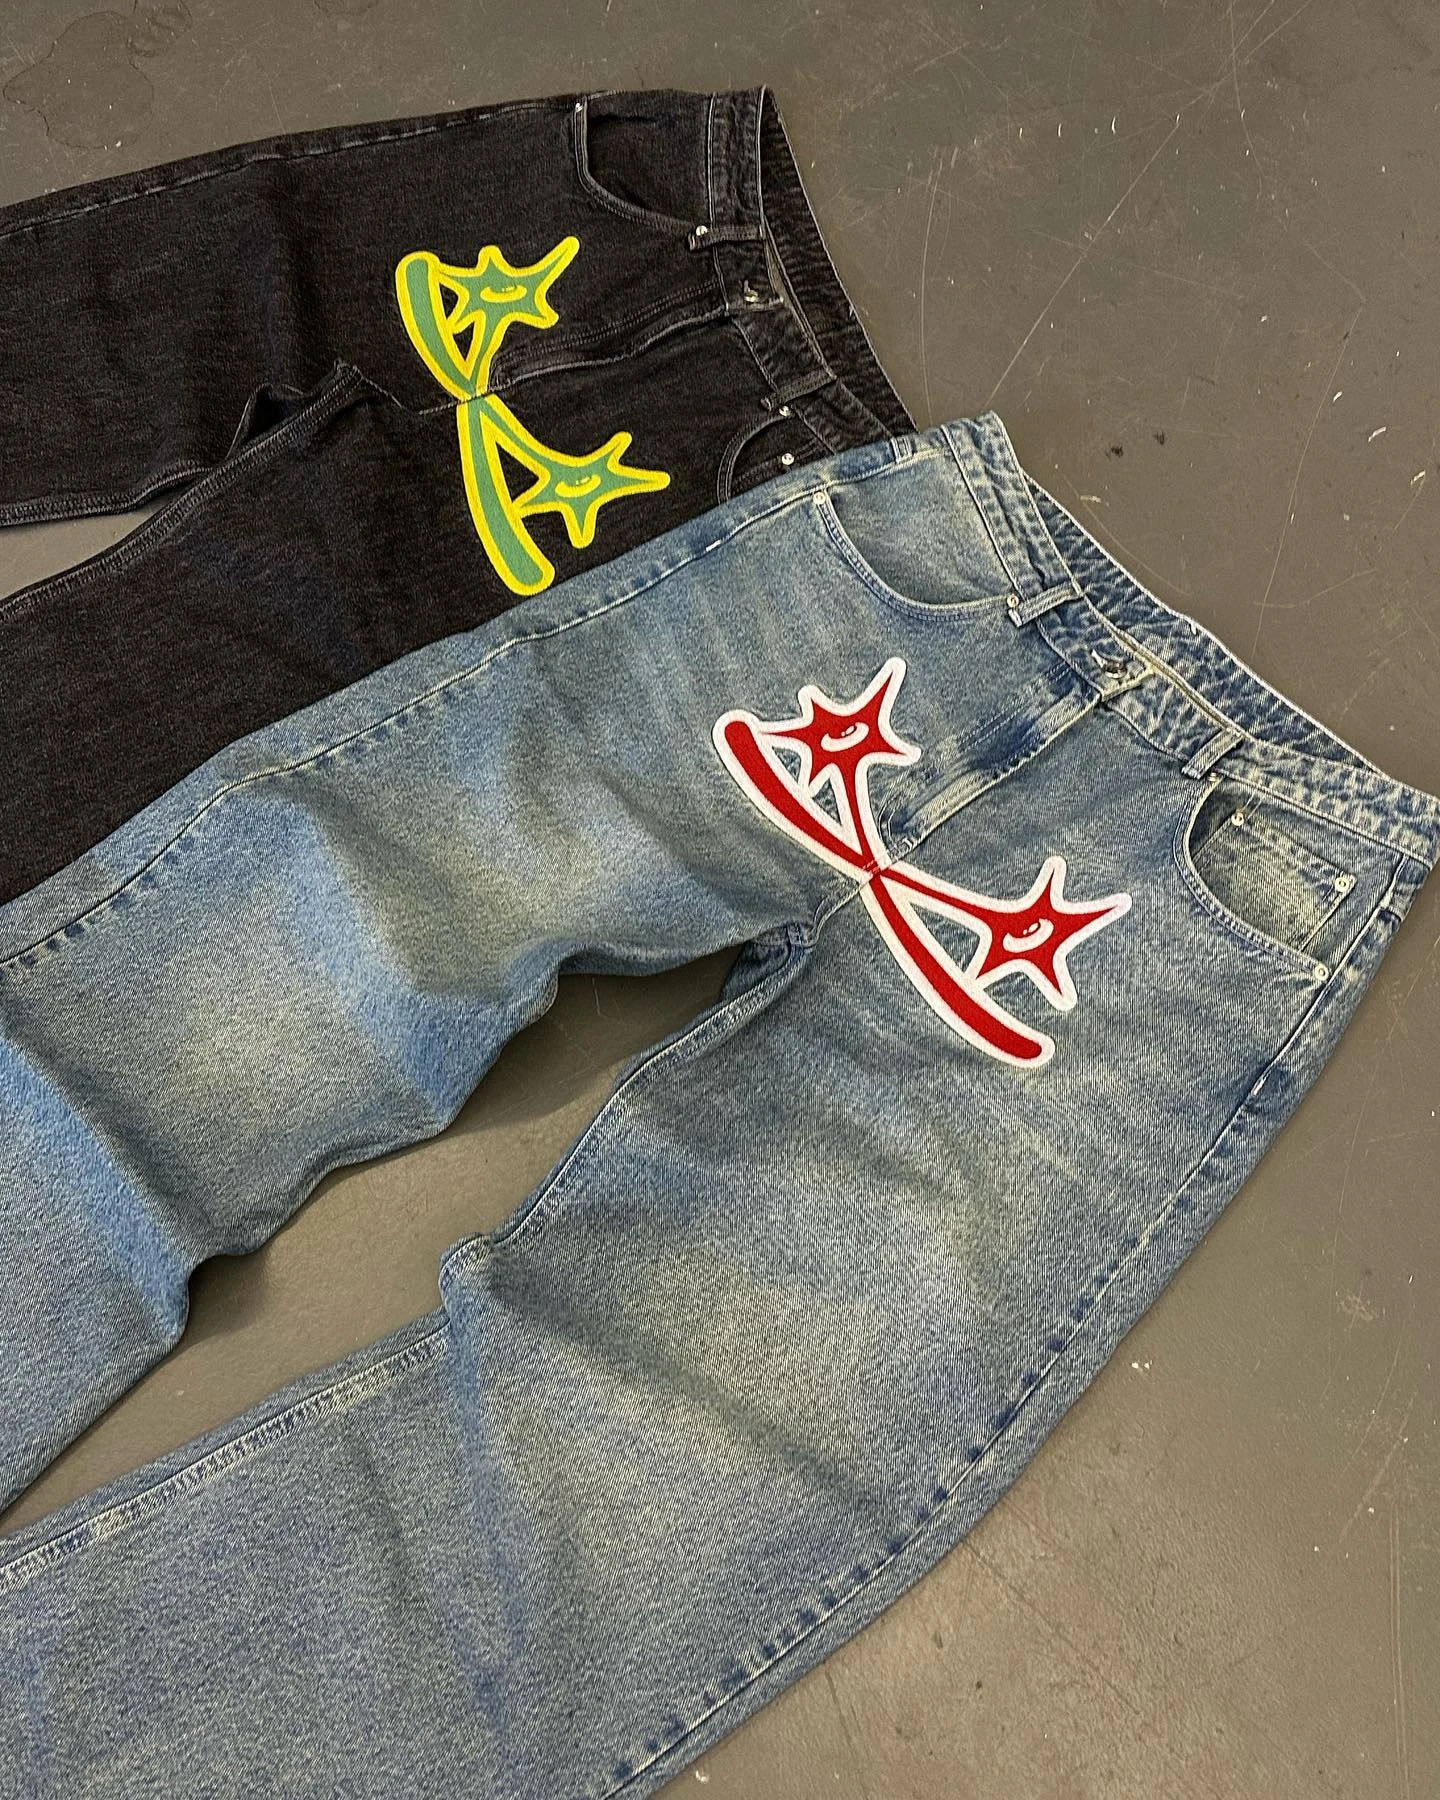 Y2K Star Print Hip Hop Denim Ripstop Pants For Men Low Waist, Loose Fit,  American Retro Style T230815 From Louis_vi_store, $5.45